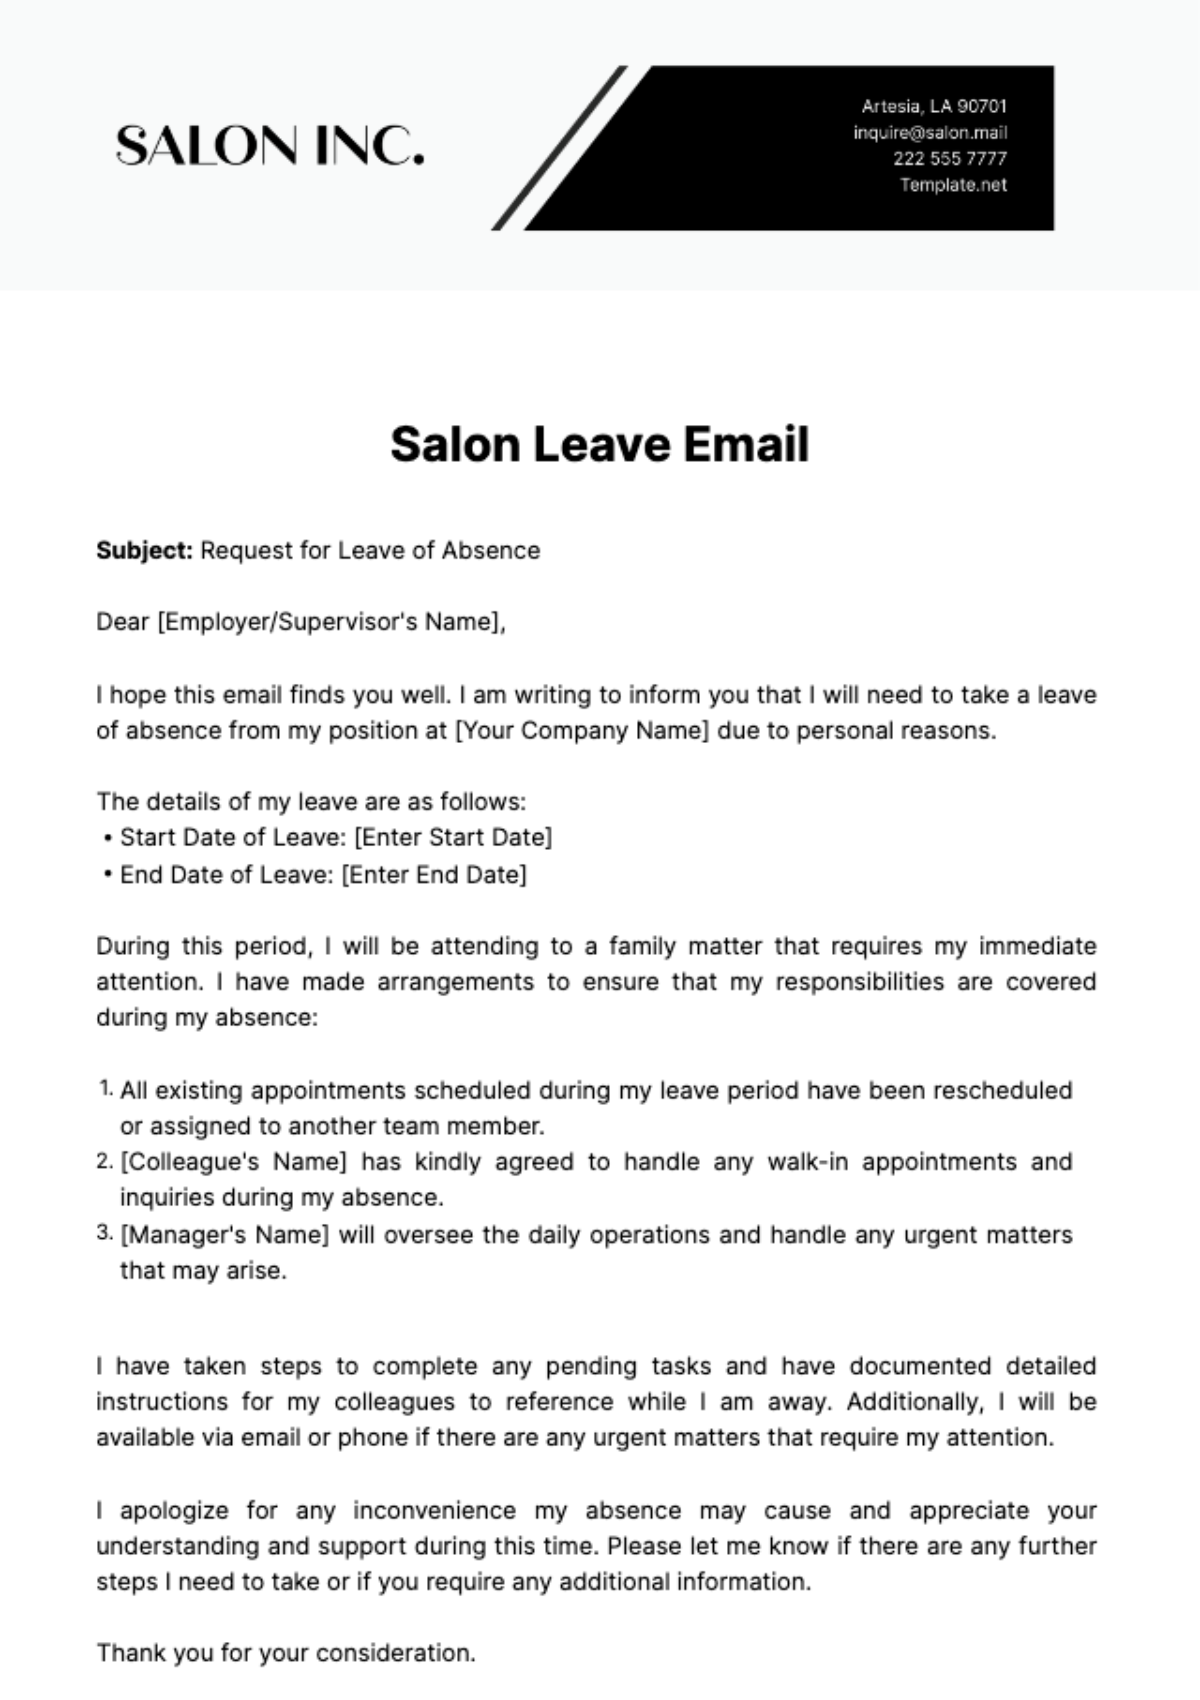 Free Salon Leave Email Template